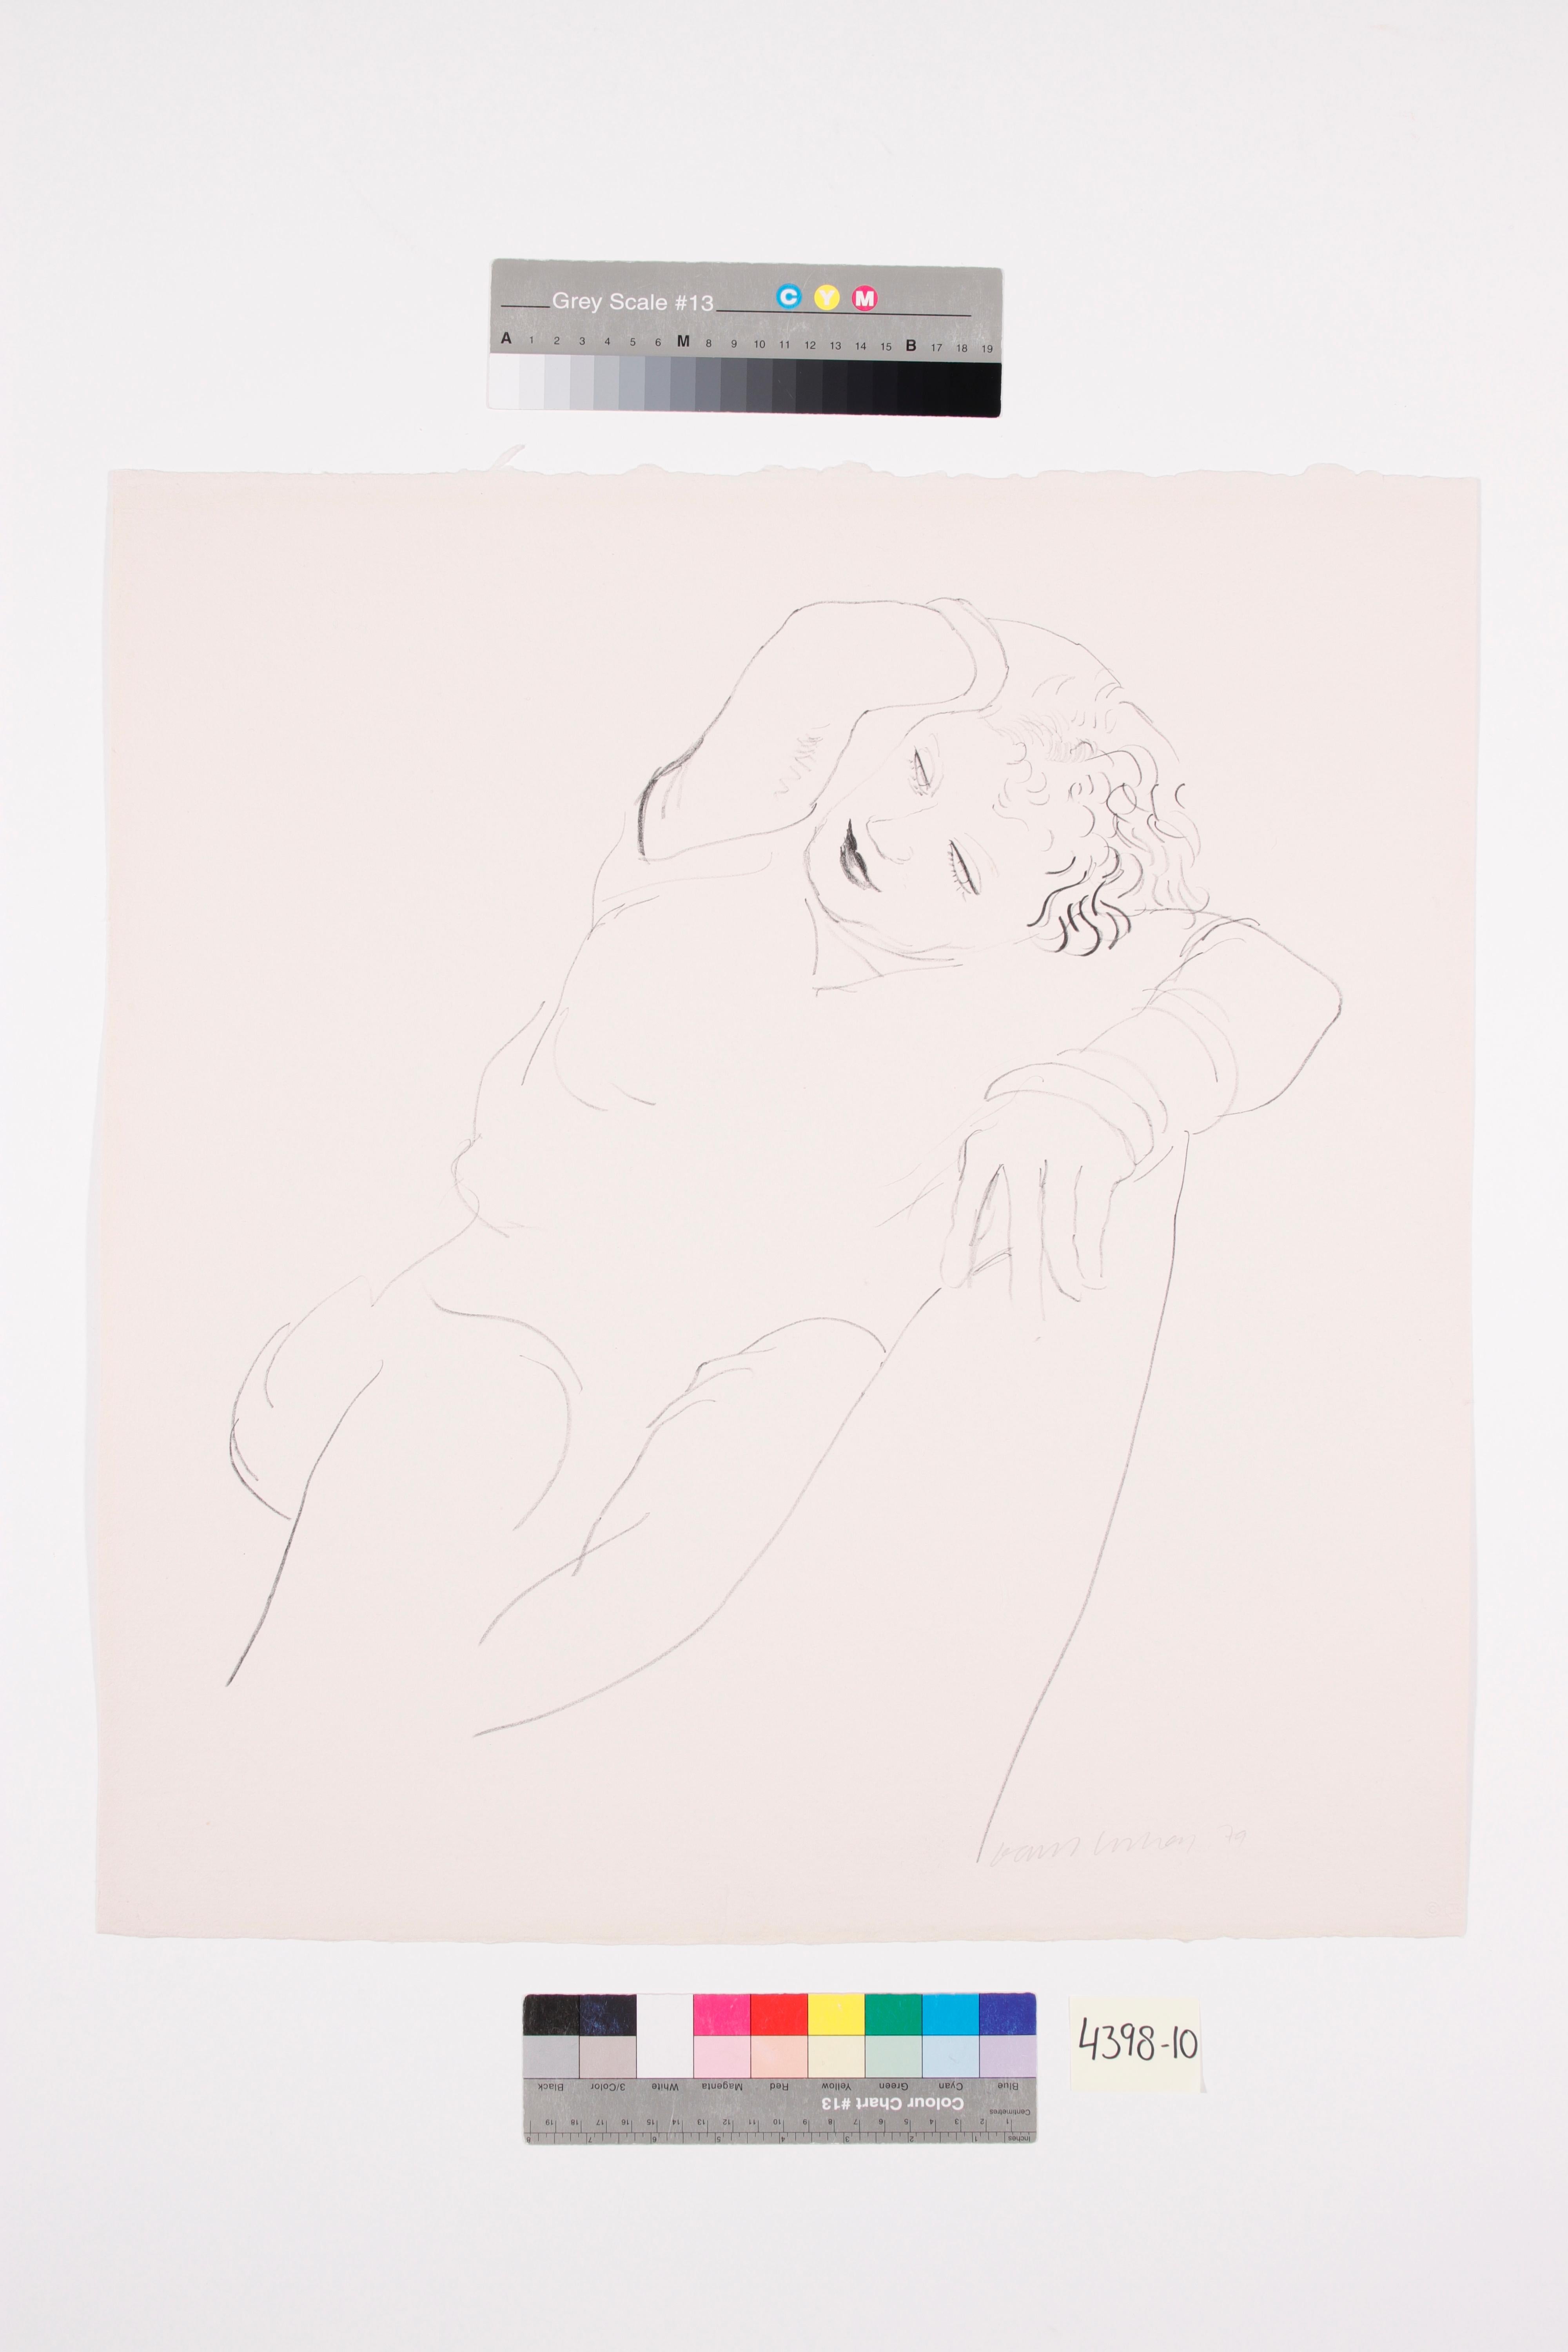 David Hockney- Celia Reclining
Lithograph, 1979
Signed and dated in pencil.
Un unnumbered copy apart from the numbered edition of 100 (& 24 Artist proofs).
Inscribed in pencil to verso of sheet 